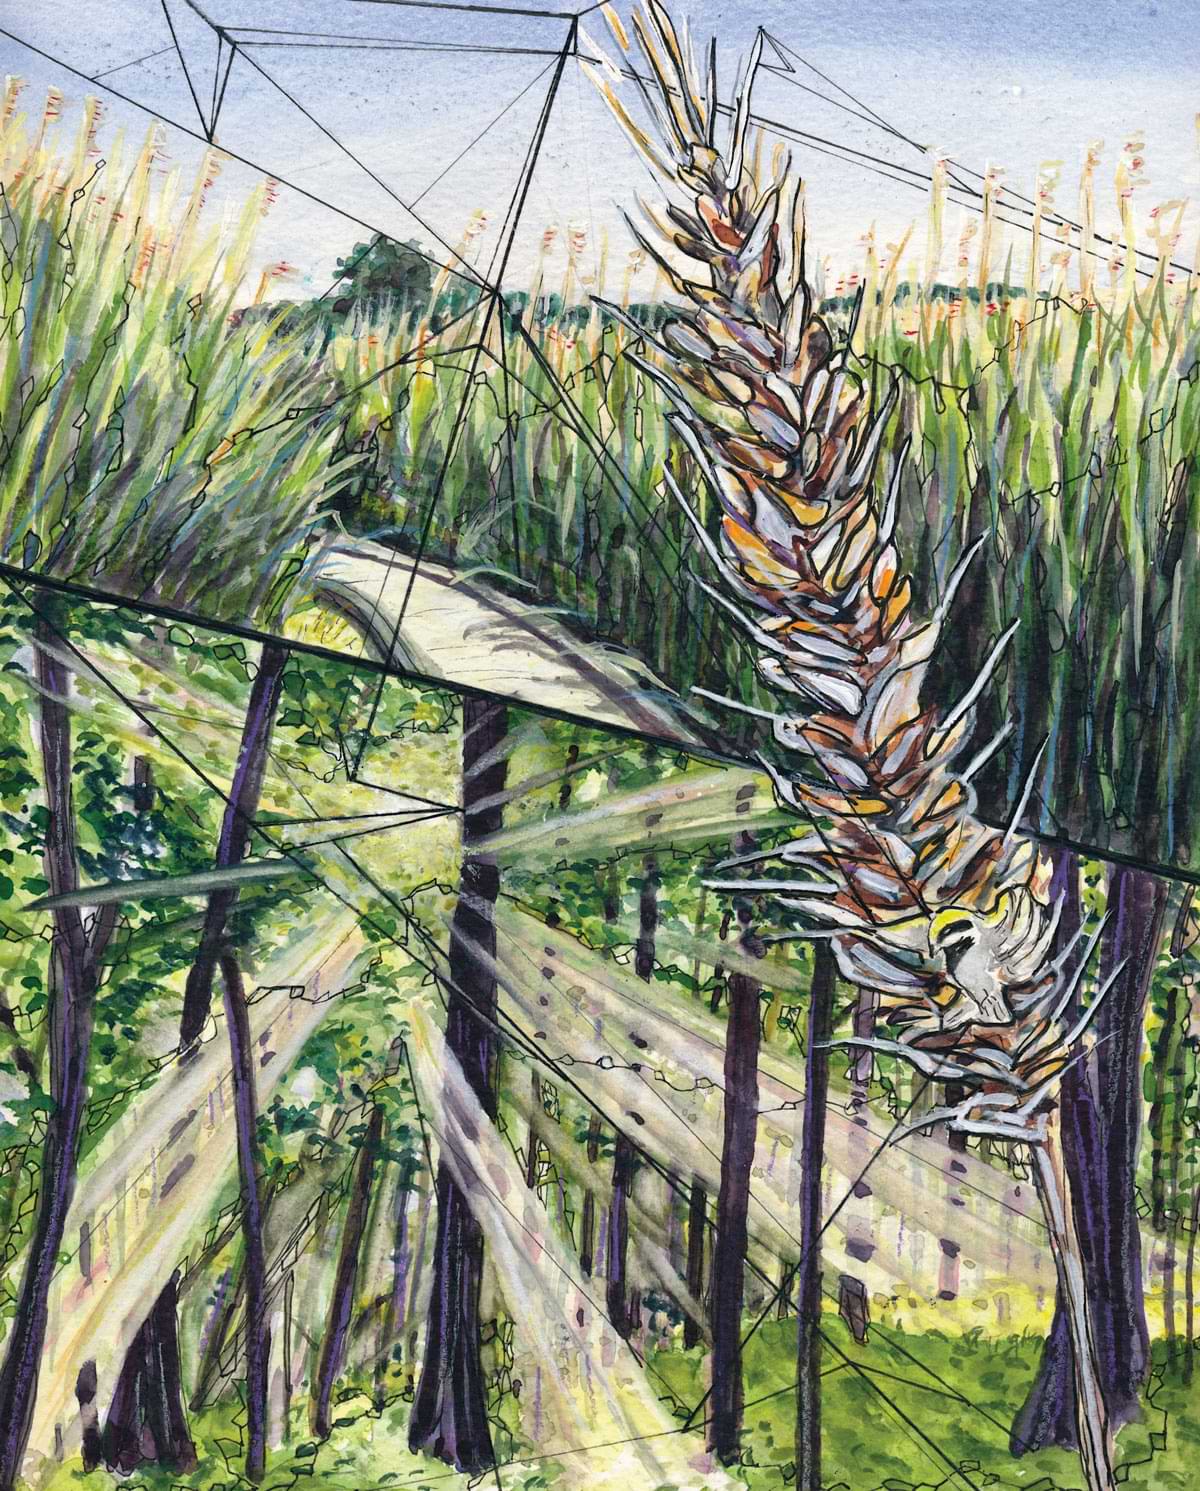 “Delicate Links” by Nika Meyers; Watercolor, ink, and colored pencil on paper — features two vital landscapes connected by the Appalachian corridor